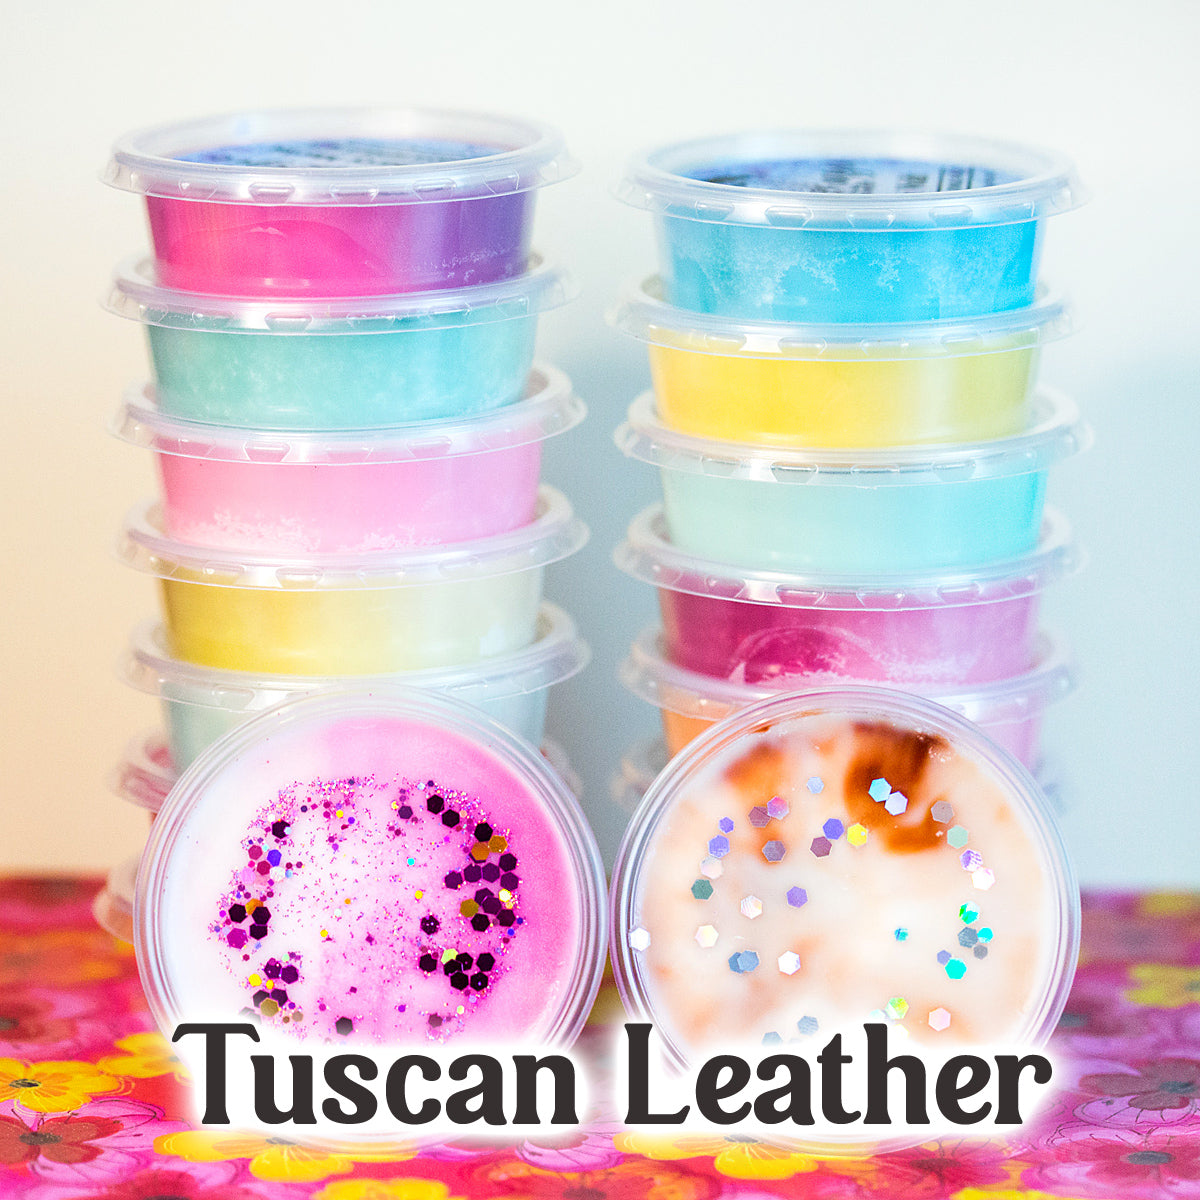 Tuscan Leather - Wachs Melt Scent Cup